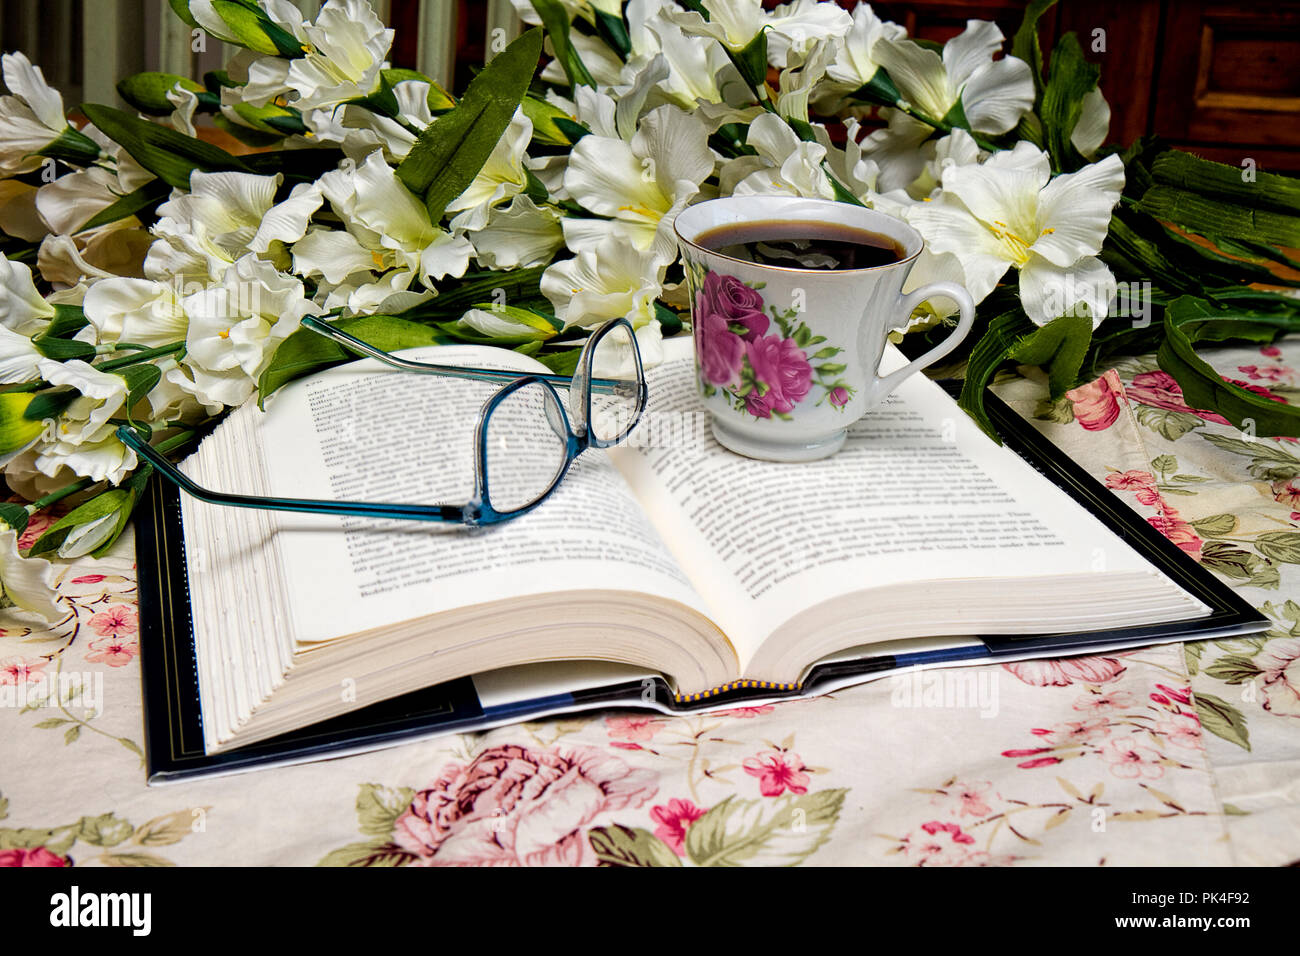 Book opened up with pair of glasses and a cup of coffee sitting next to it while reading.  Bouquet of flowers in image. Stock Photo